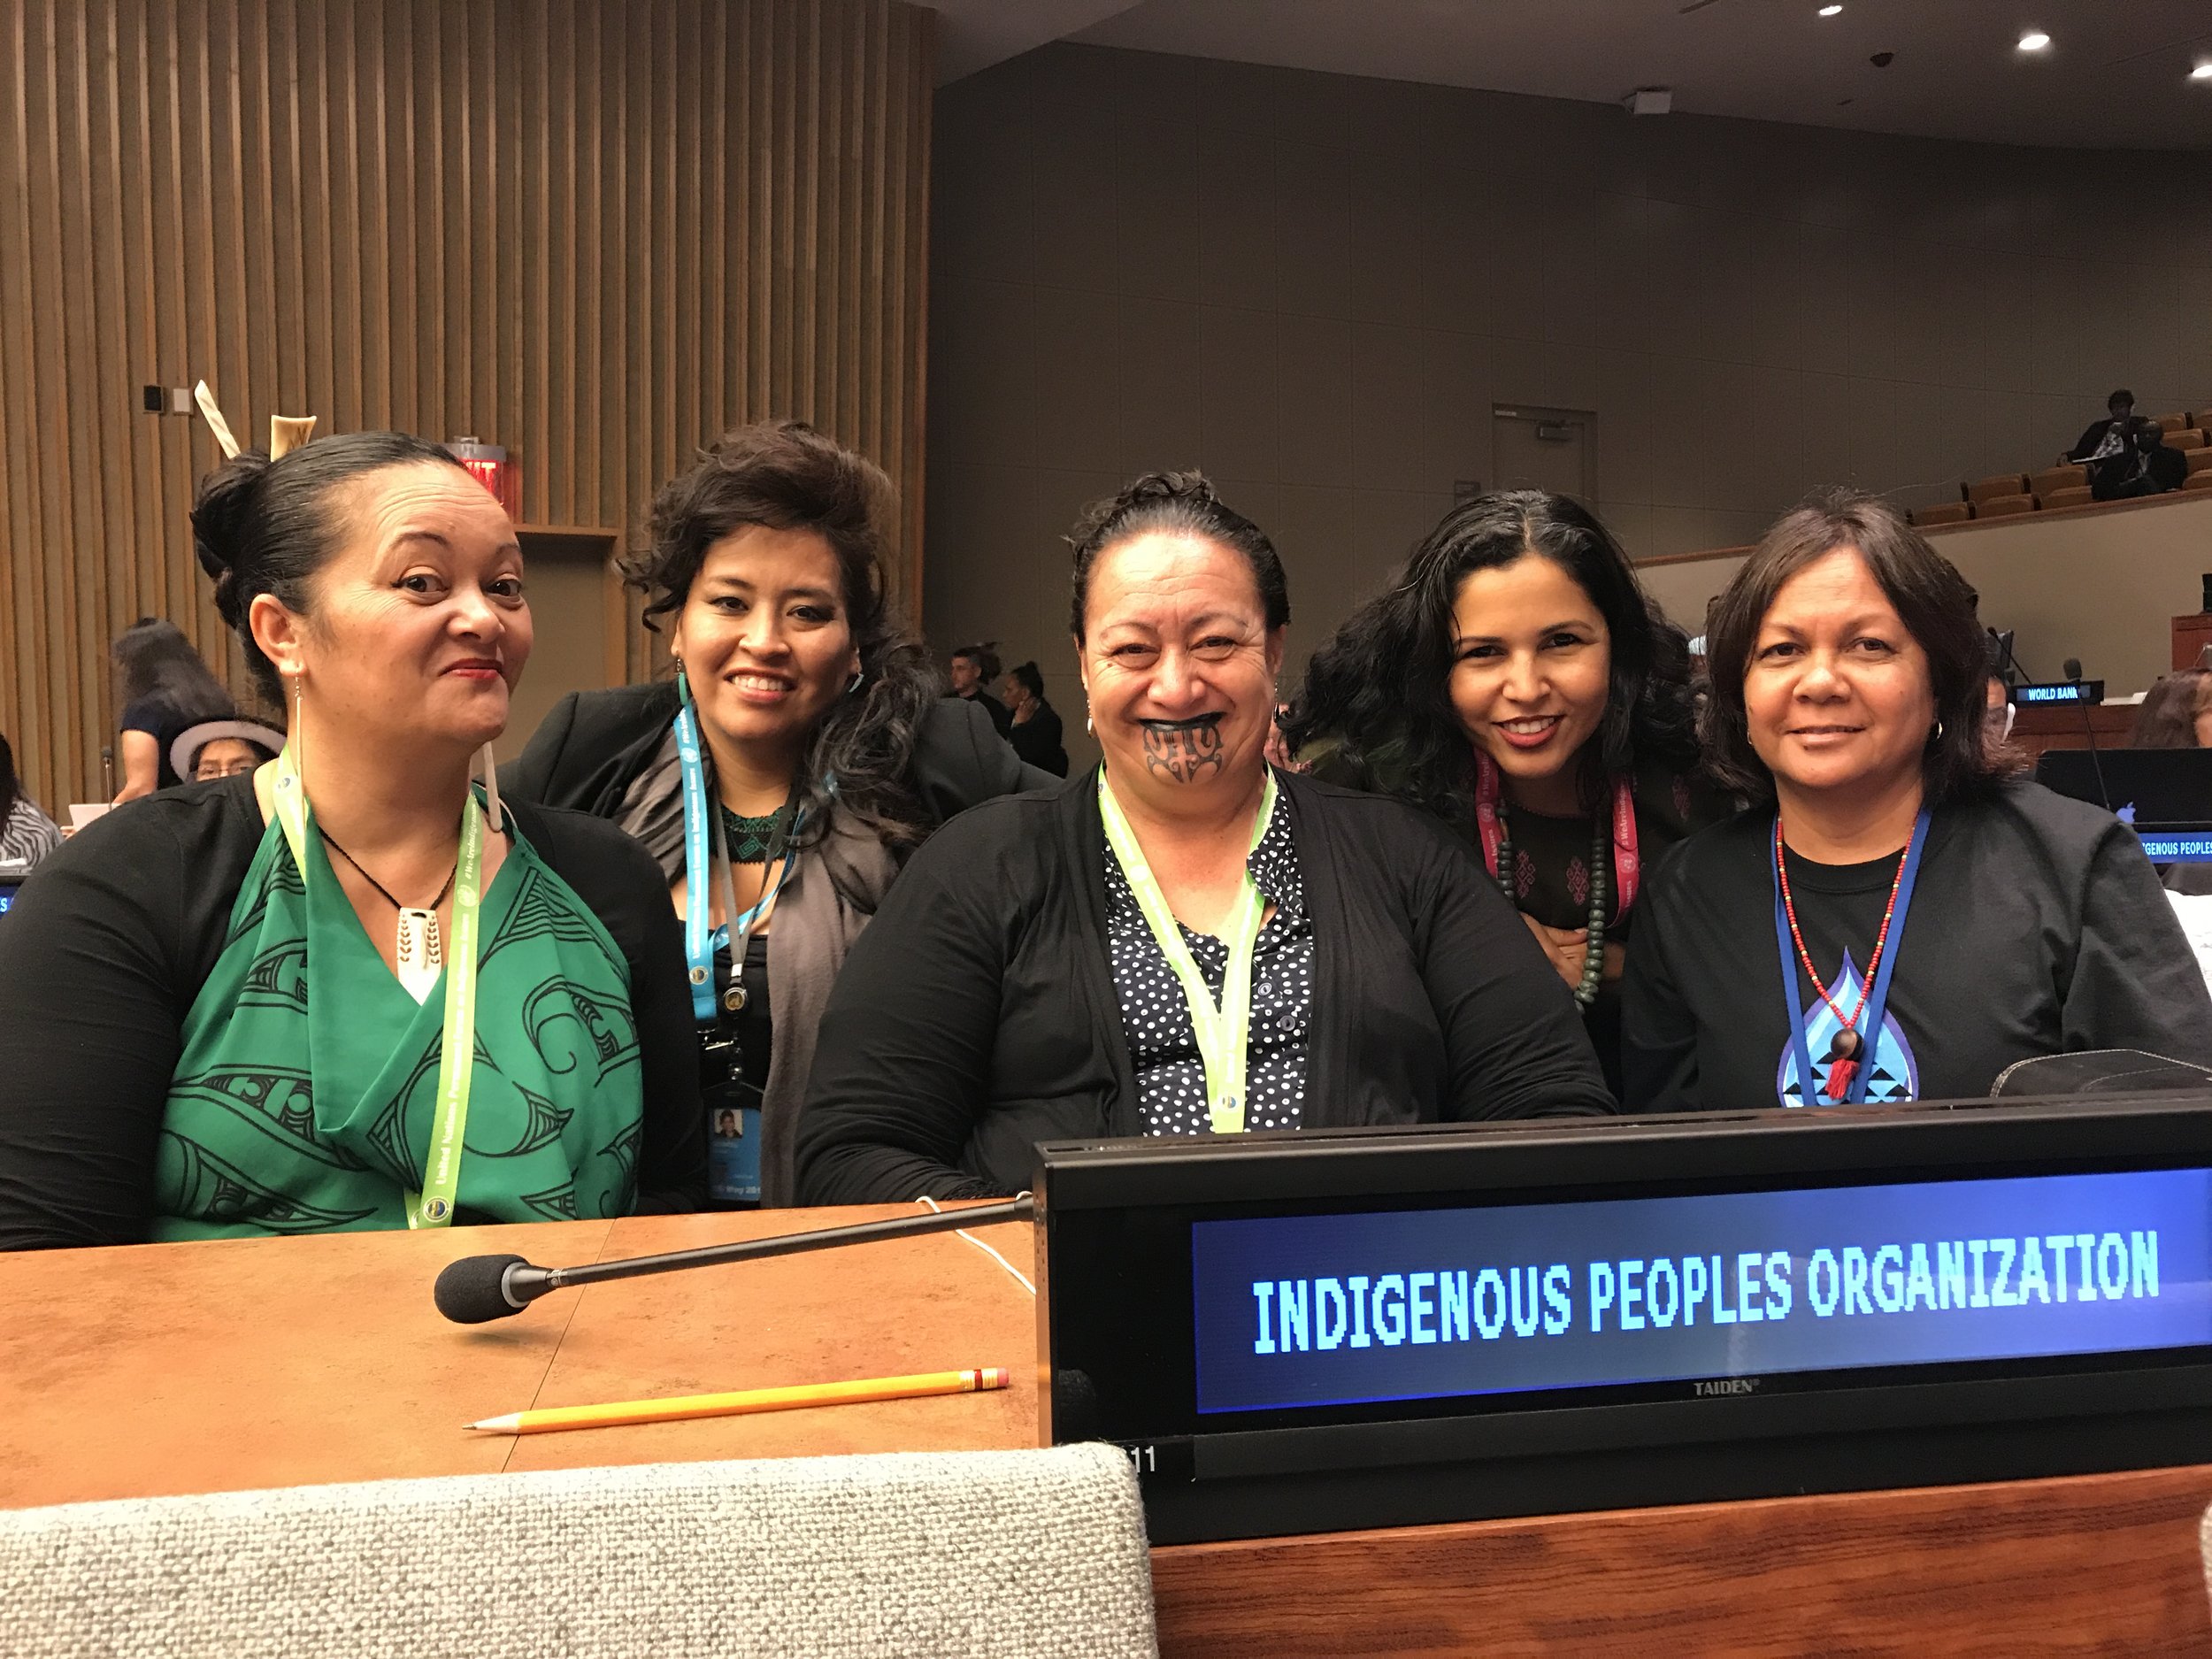 United Nations Permanent Forum on Indigenous Issues